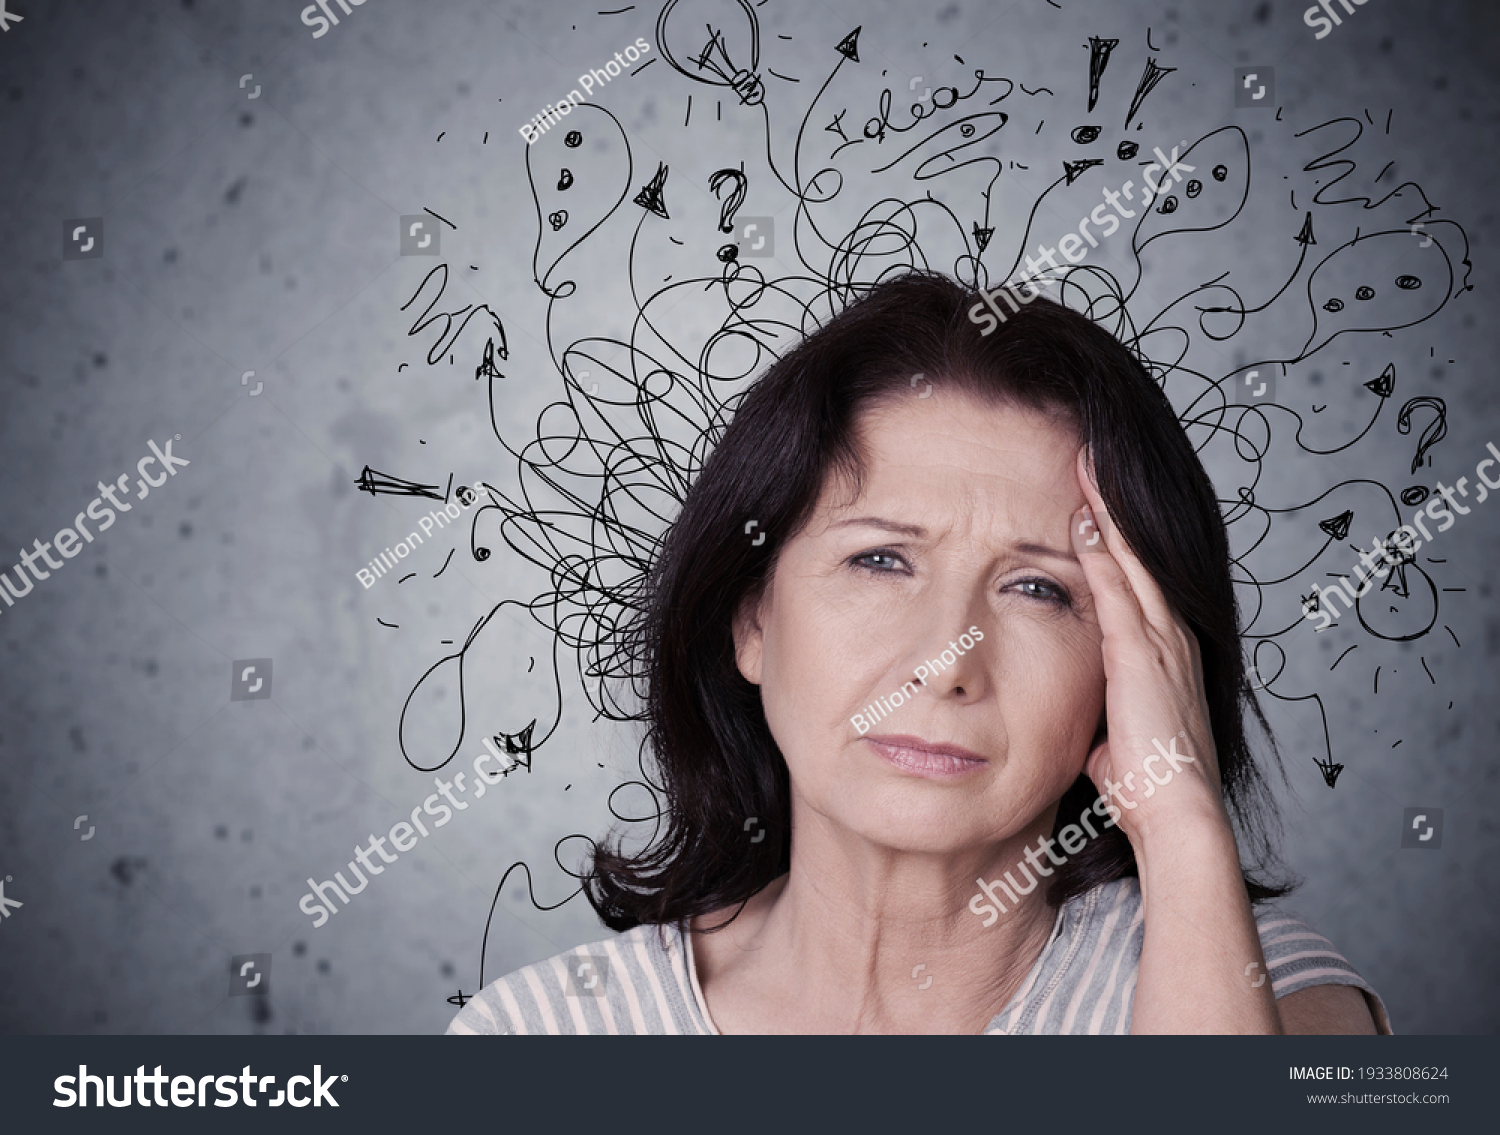 Young woman with worried stressed face expression with illustration #1933808624